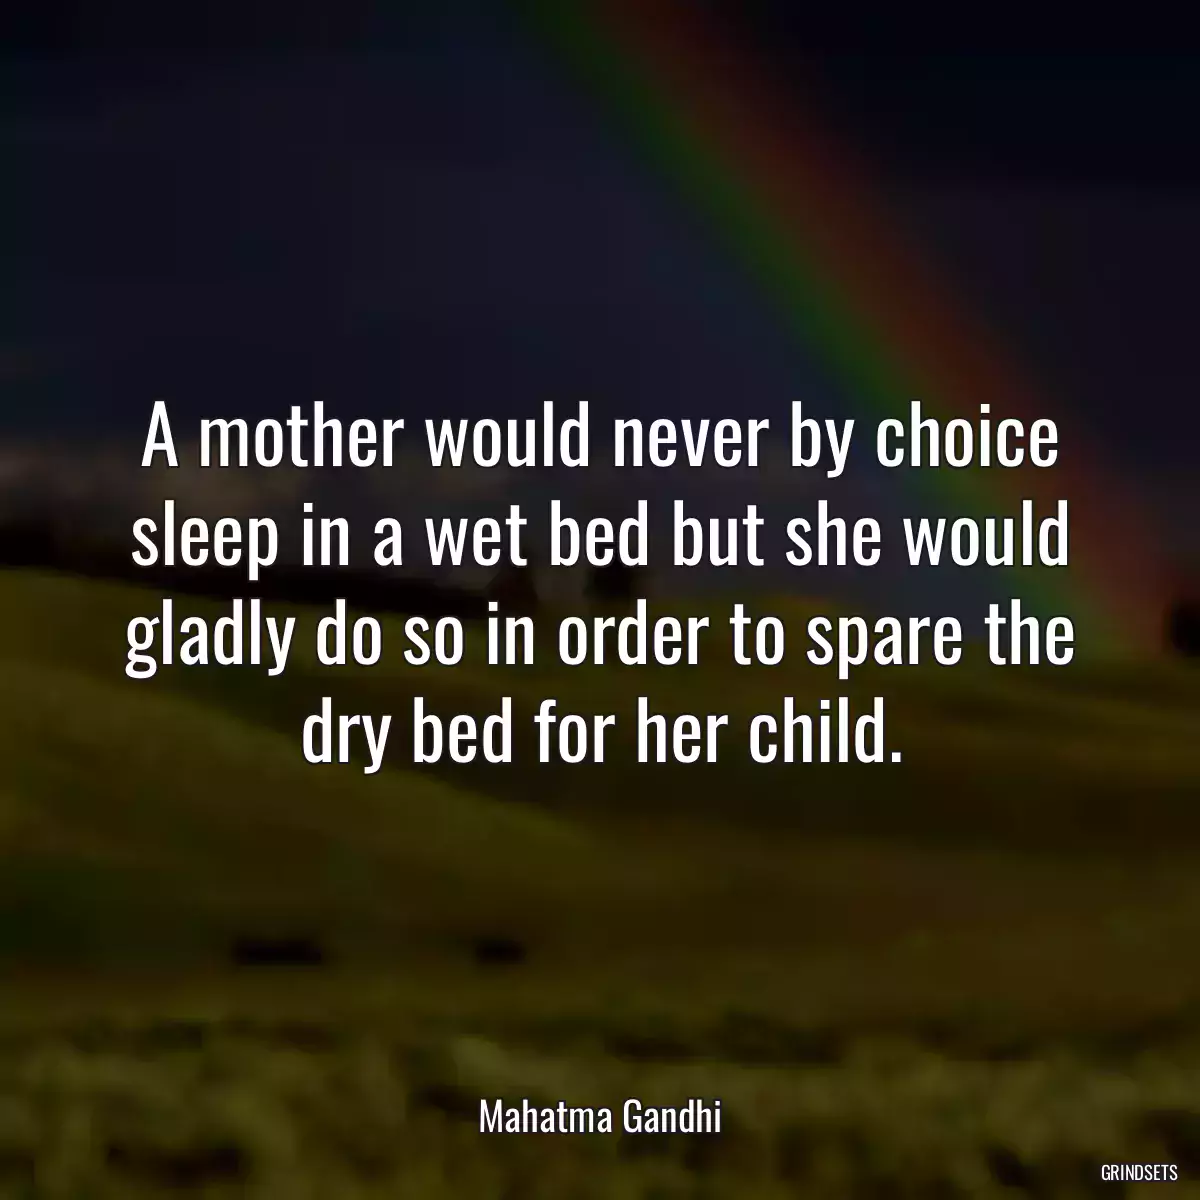 A mother would never by choice sleep in a wet bed but she would gladly do so in order to spare the dry bed for her child.